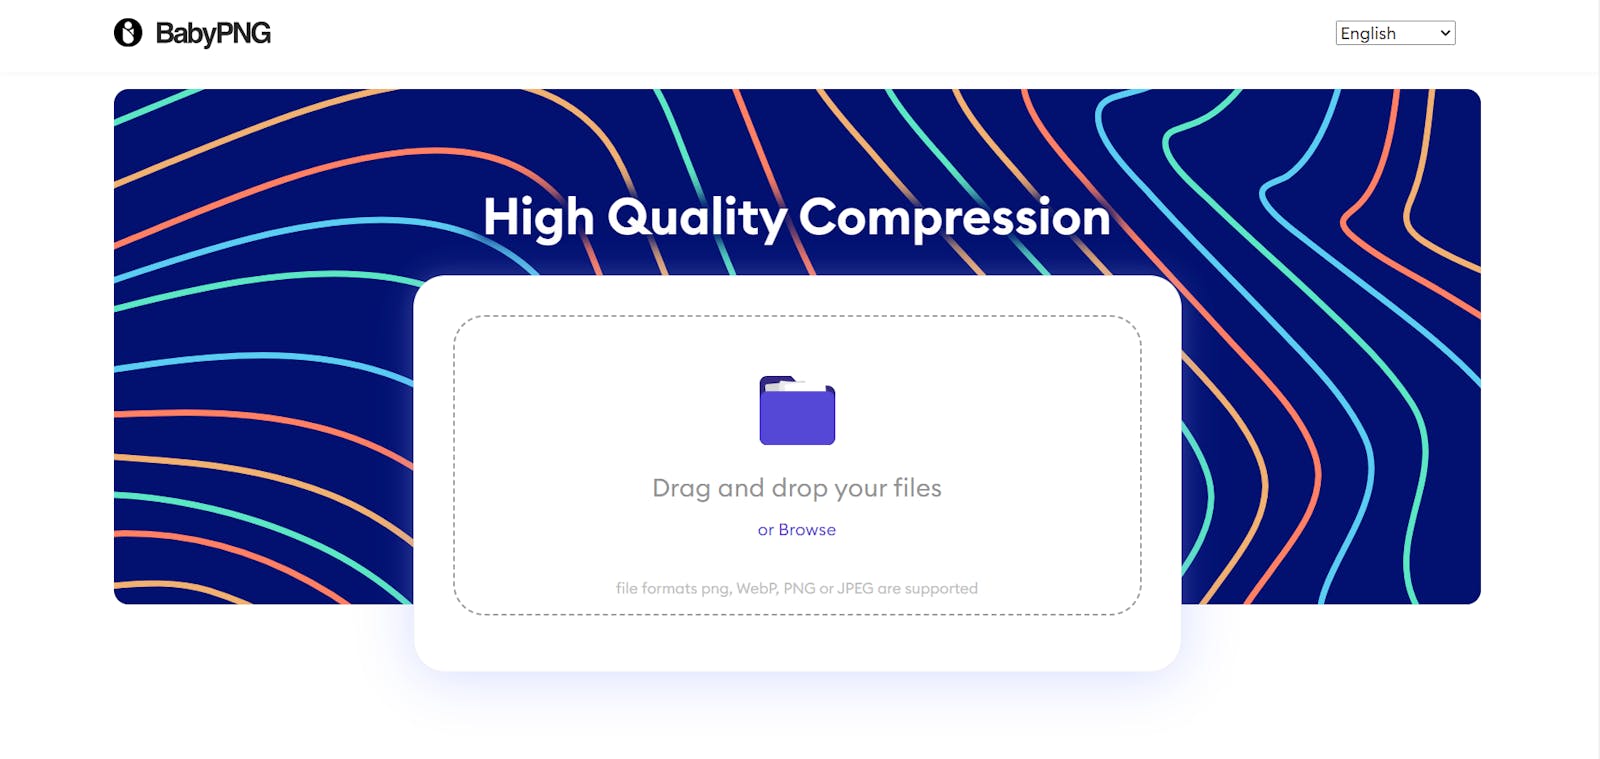 How to Compress Images for Faster Loading Times and Better Web Performance